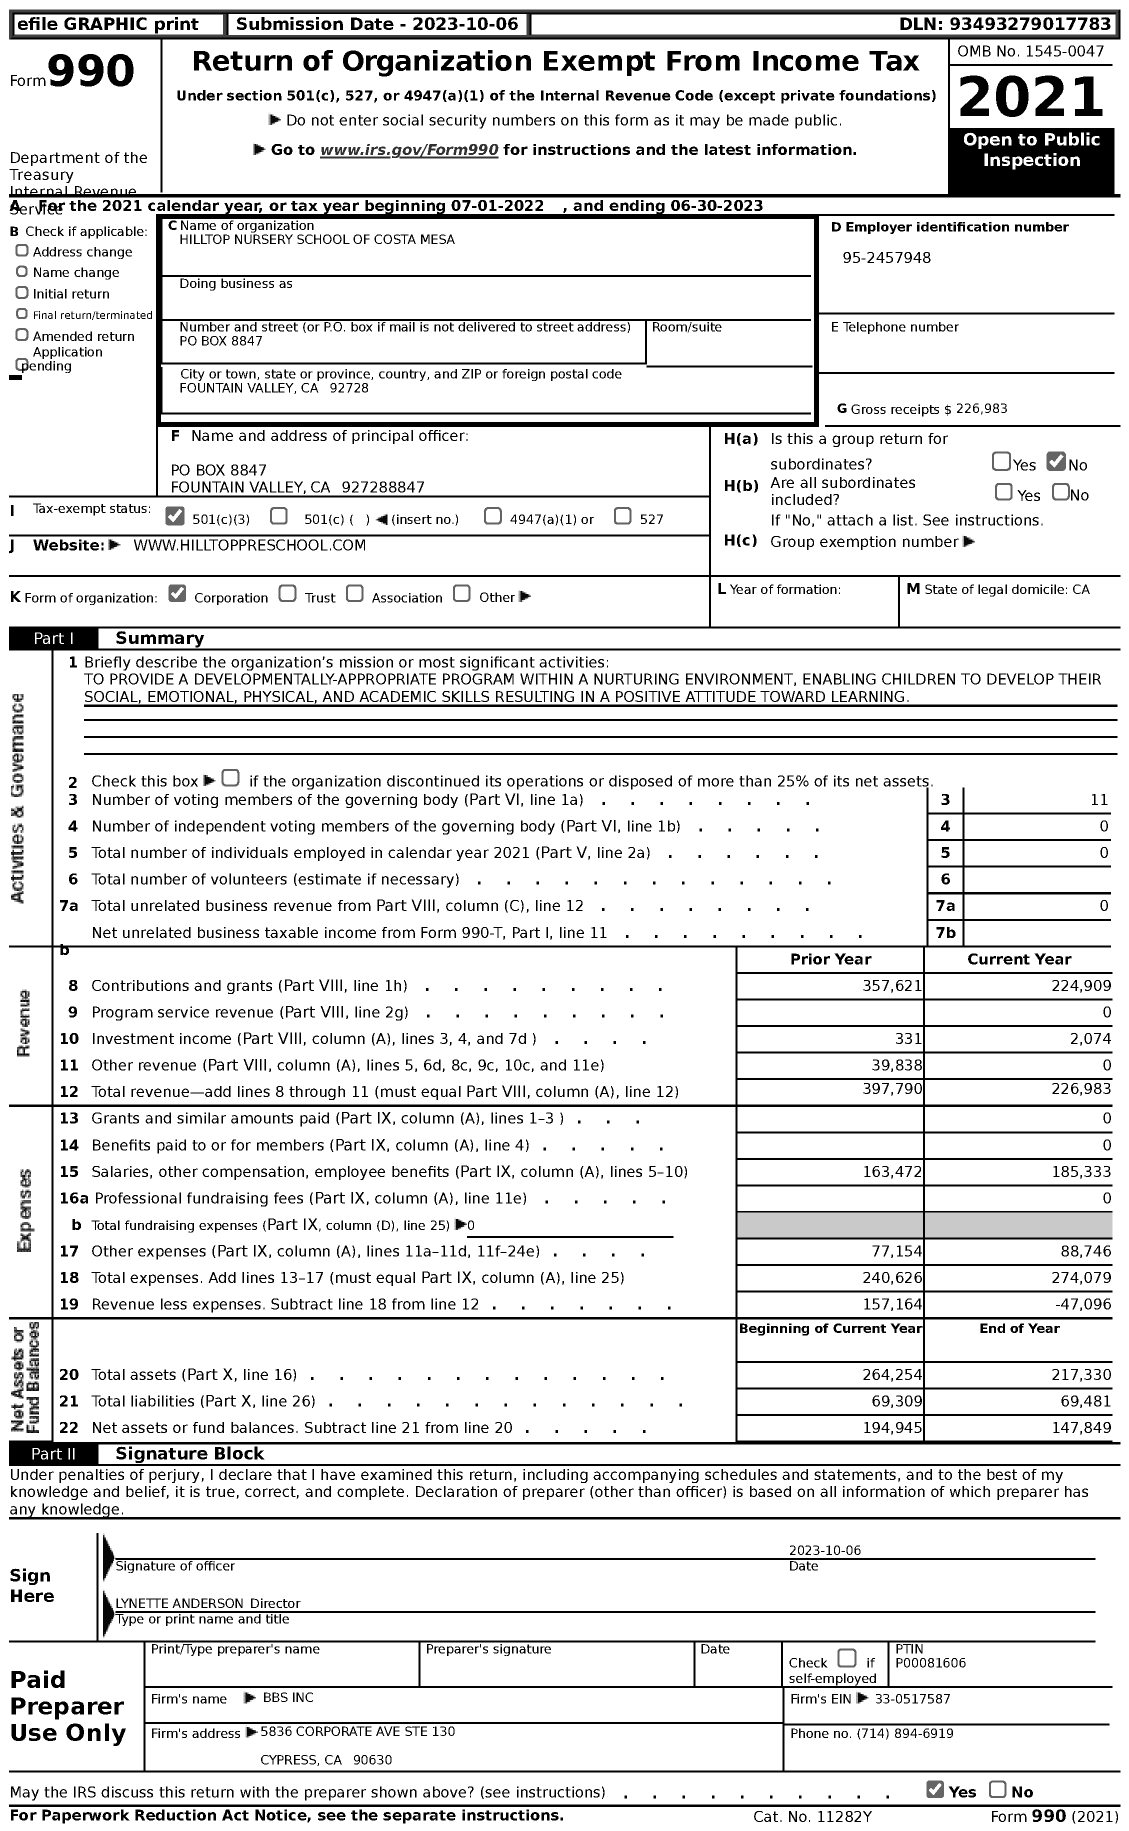 Image of first page of 2022 Form 990 for Hilltop Nursery School of Costa Mesa